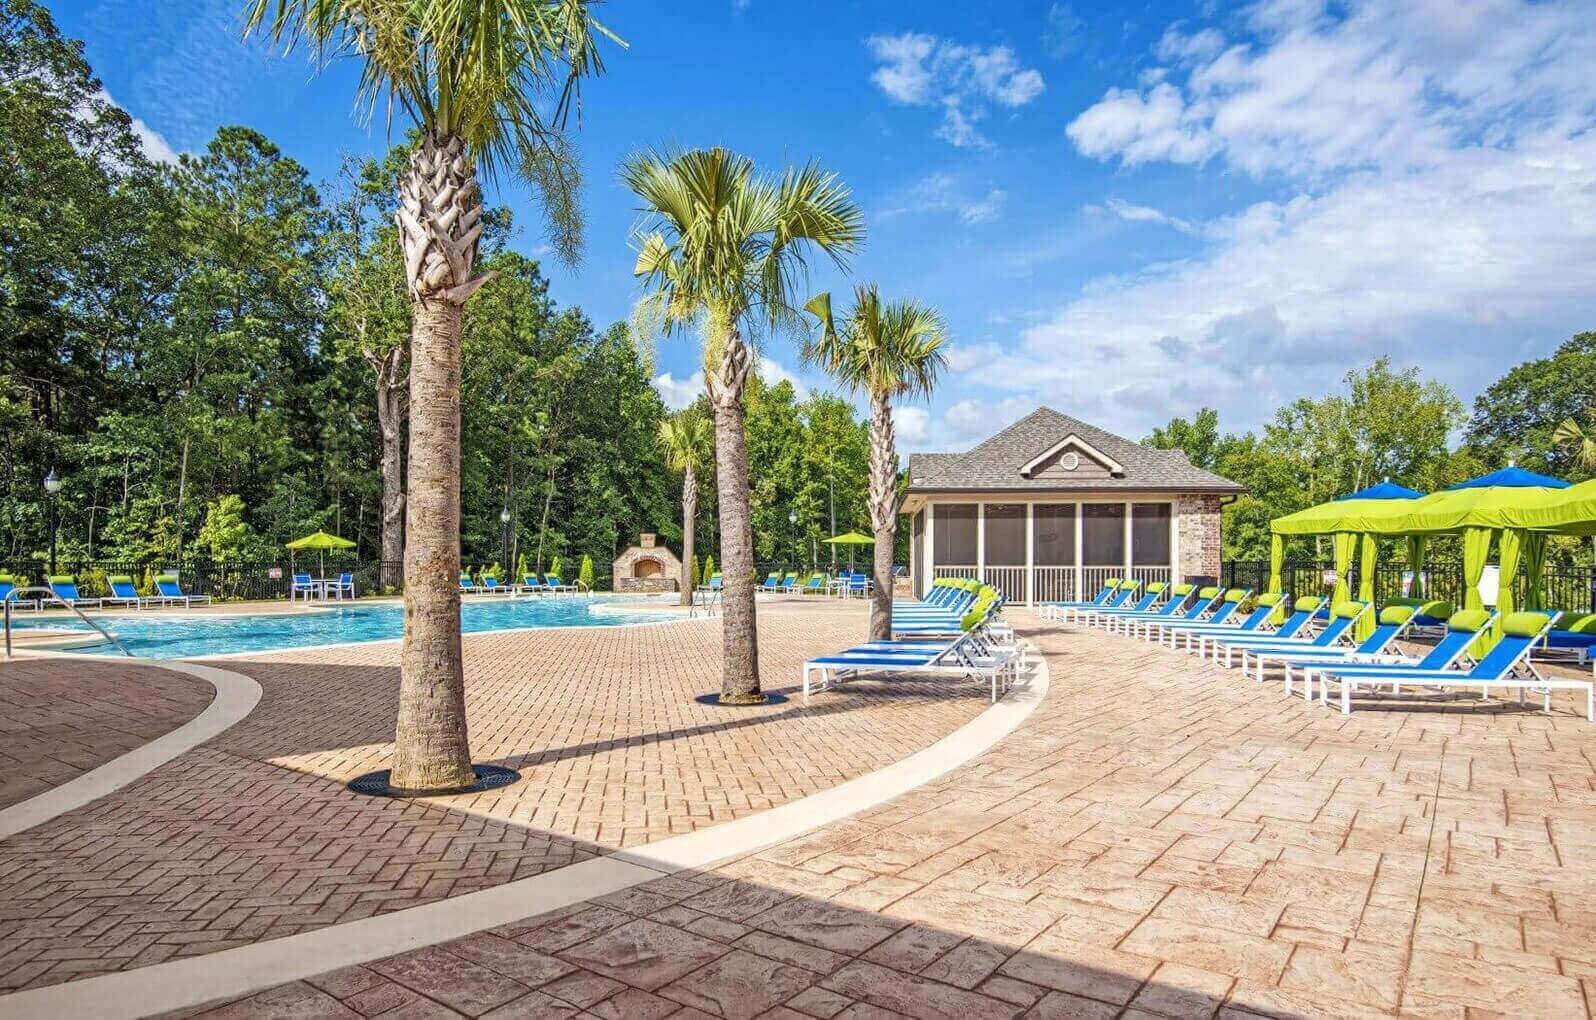 Resort-Style Pool at Bacarra Apartments, Raleigh, NC, 27606